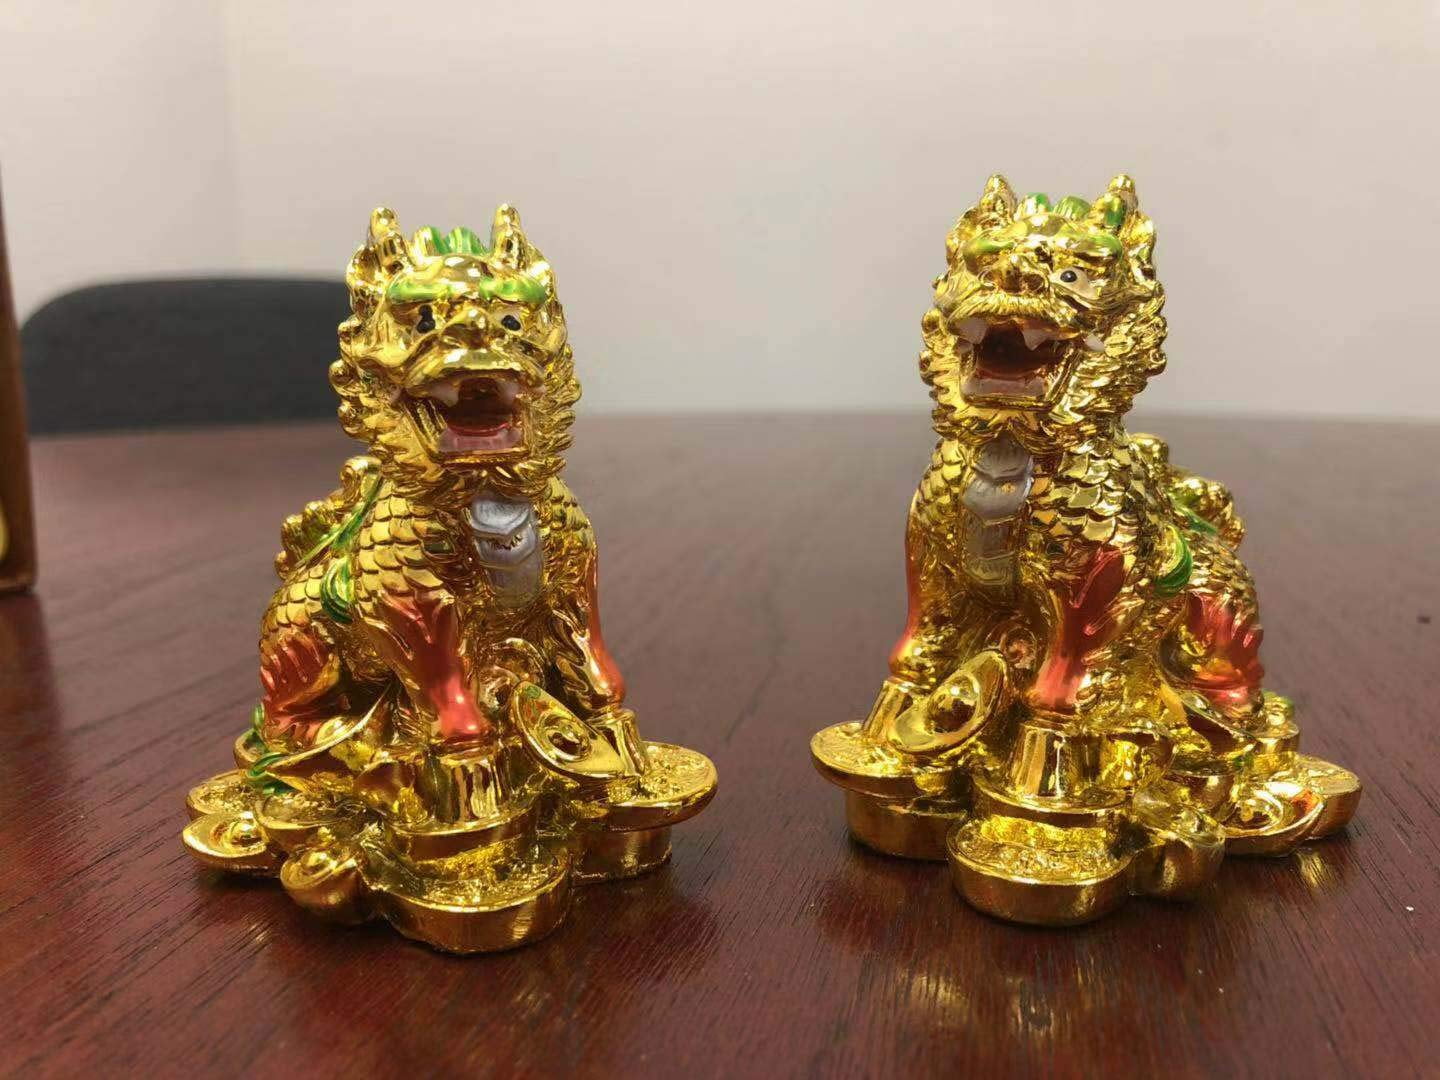 Traditional Chinese Dragon Resin Figurine/Statue,Gold color,Feng Shui-USA SHIP 